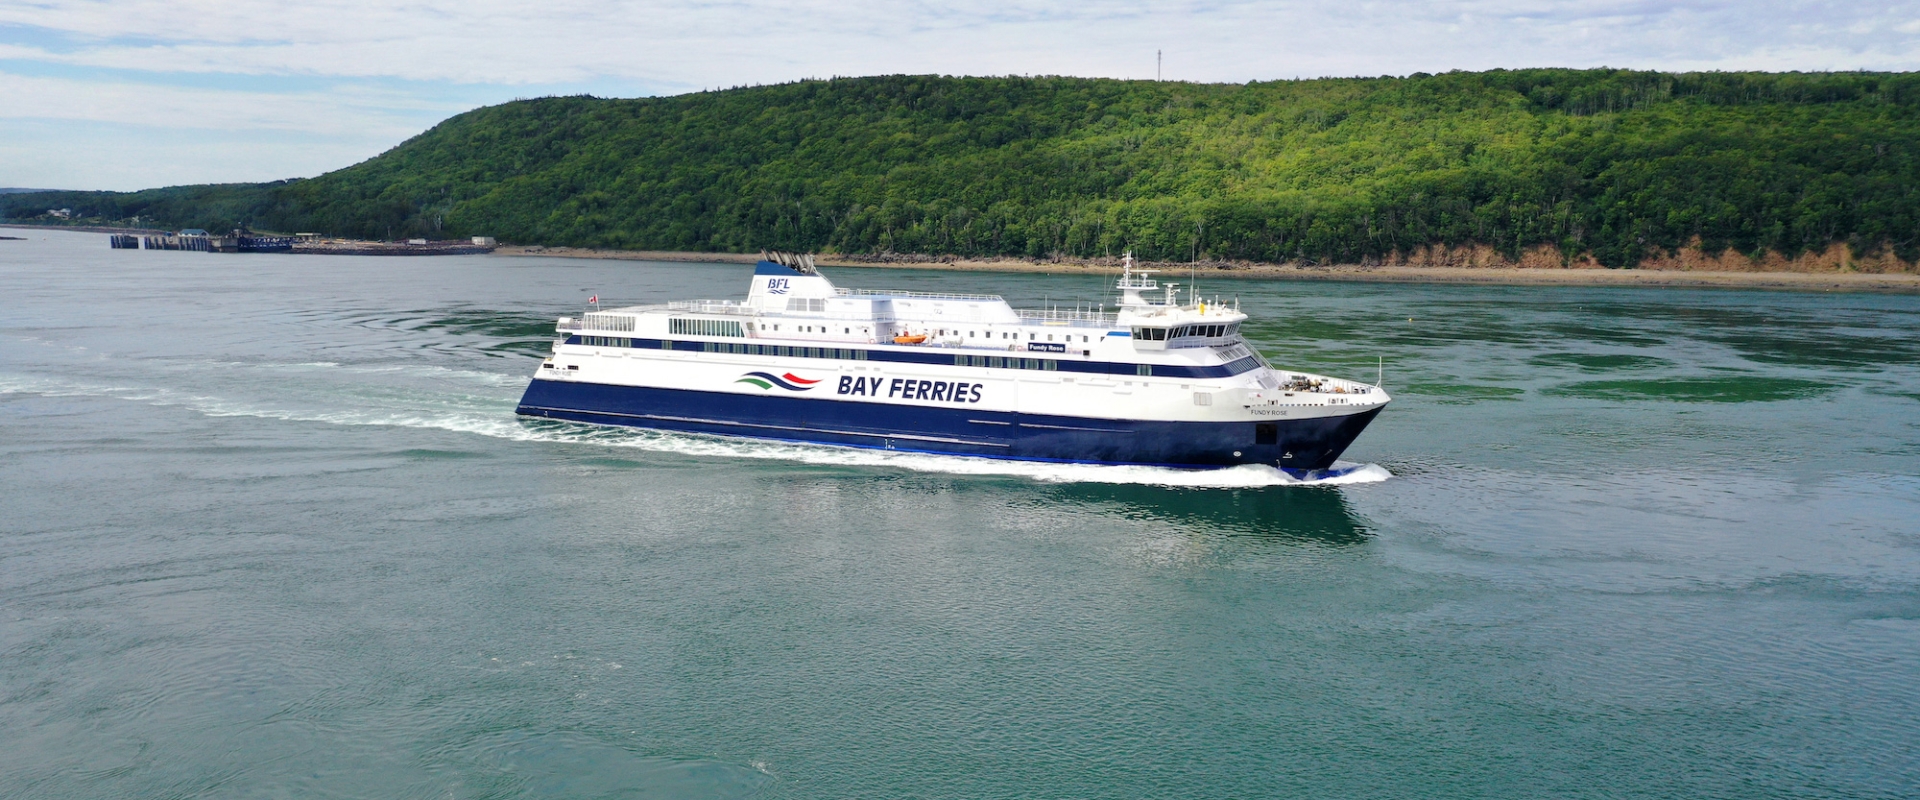 A ferry sailing in calm waters with lush green hills in the background.